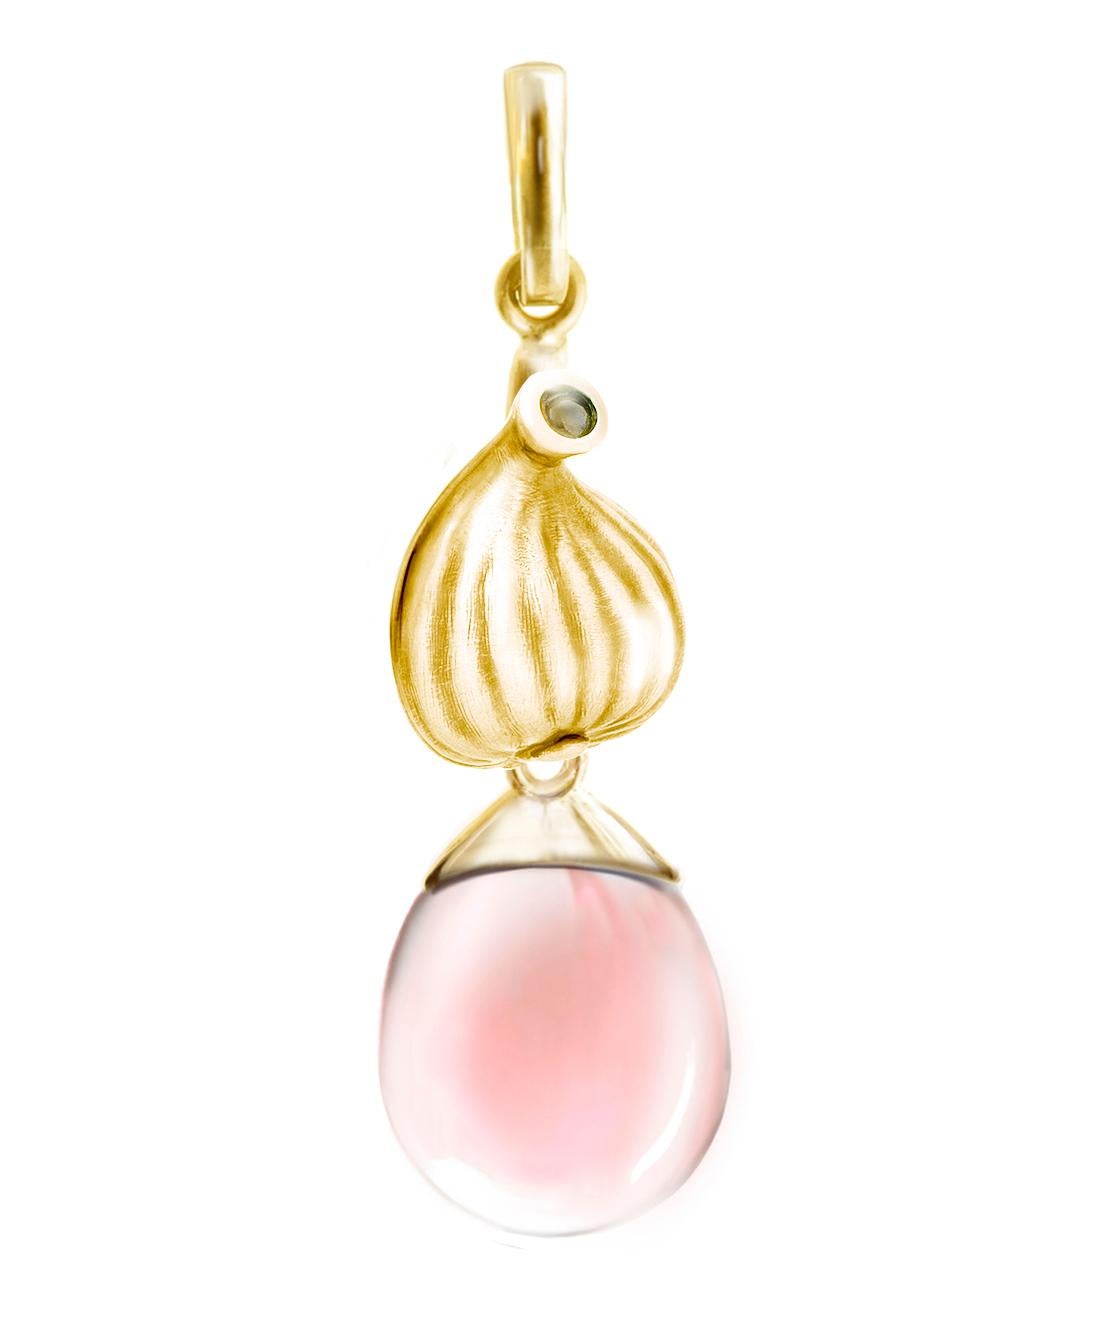 This Fig drop pendant necklace is a beautiful piece of jewellery made of 14 karat yellow gold, featuring a detachable cabochon rose quartz gem drop that is open to the light. This collection was featured in Vogue UA.

The artist behind this unique